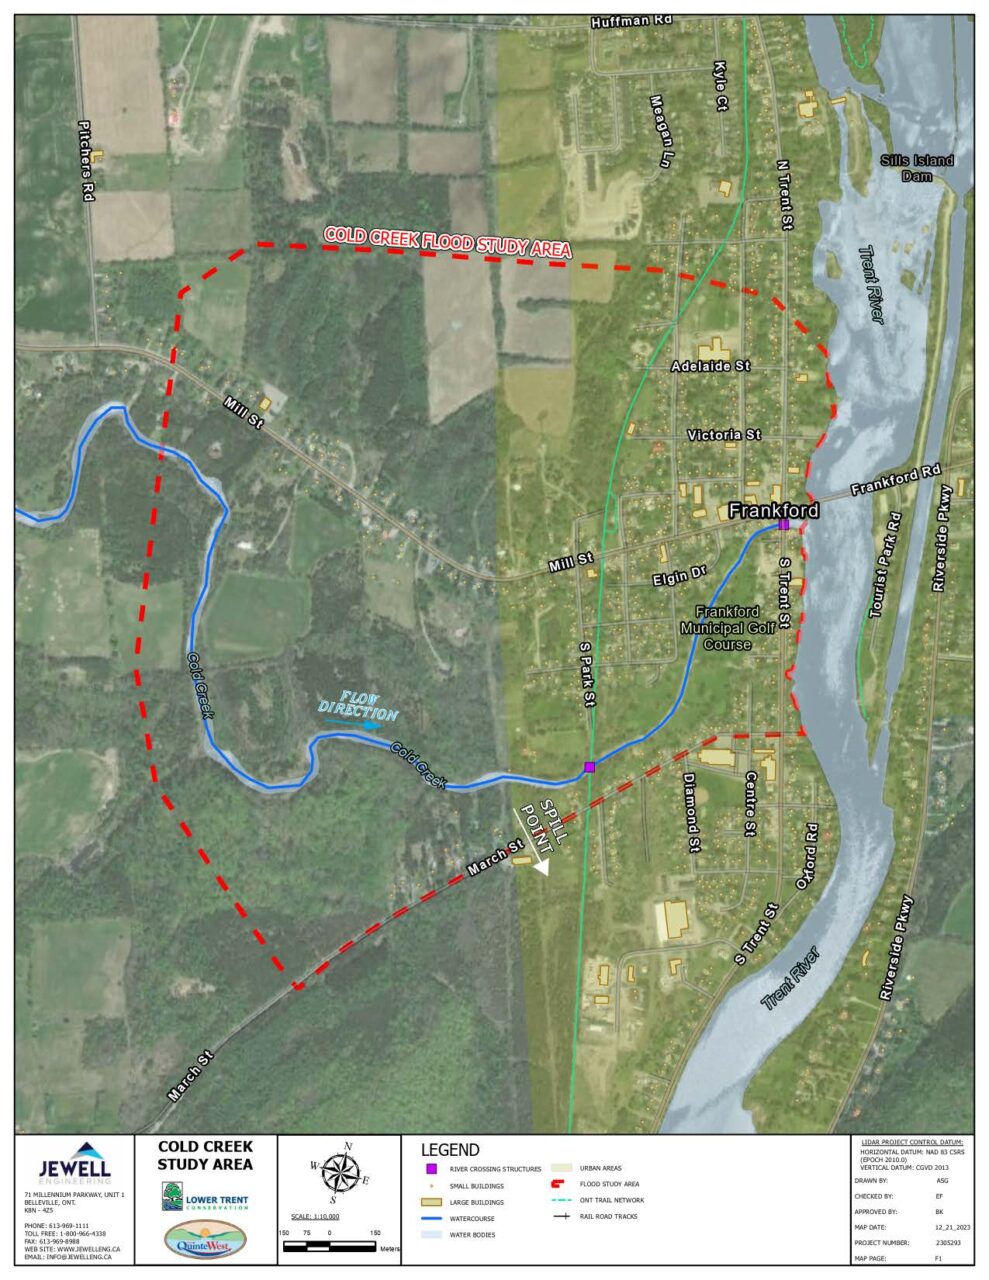 A map of the Cold Creek study area